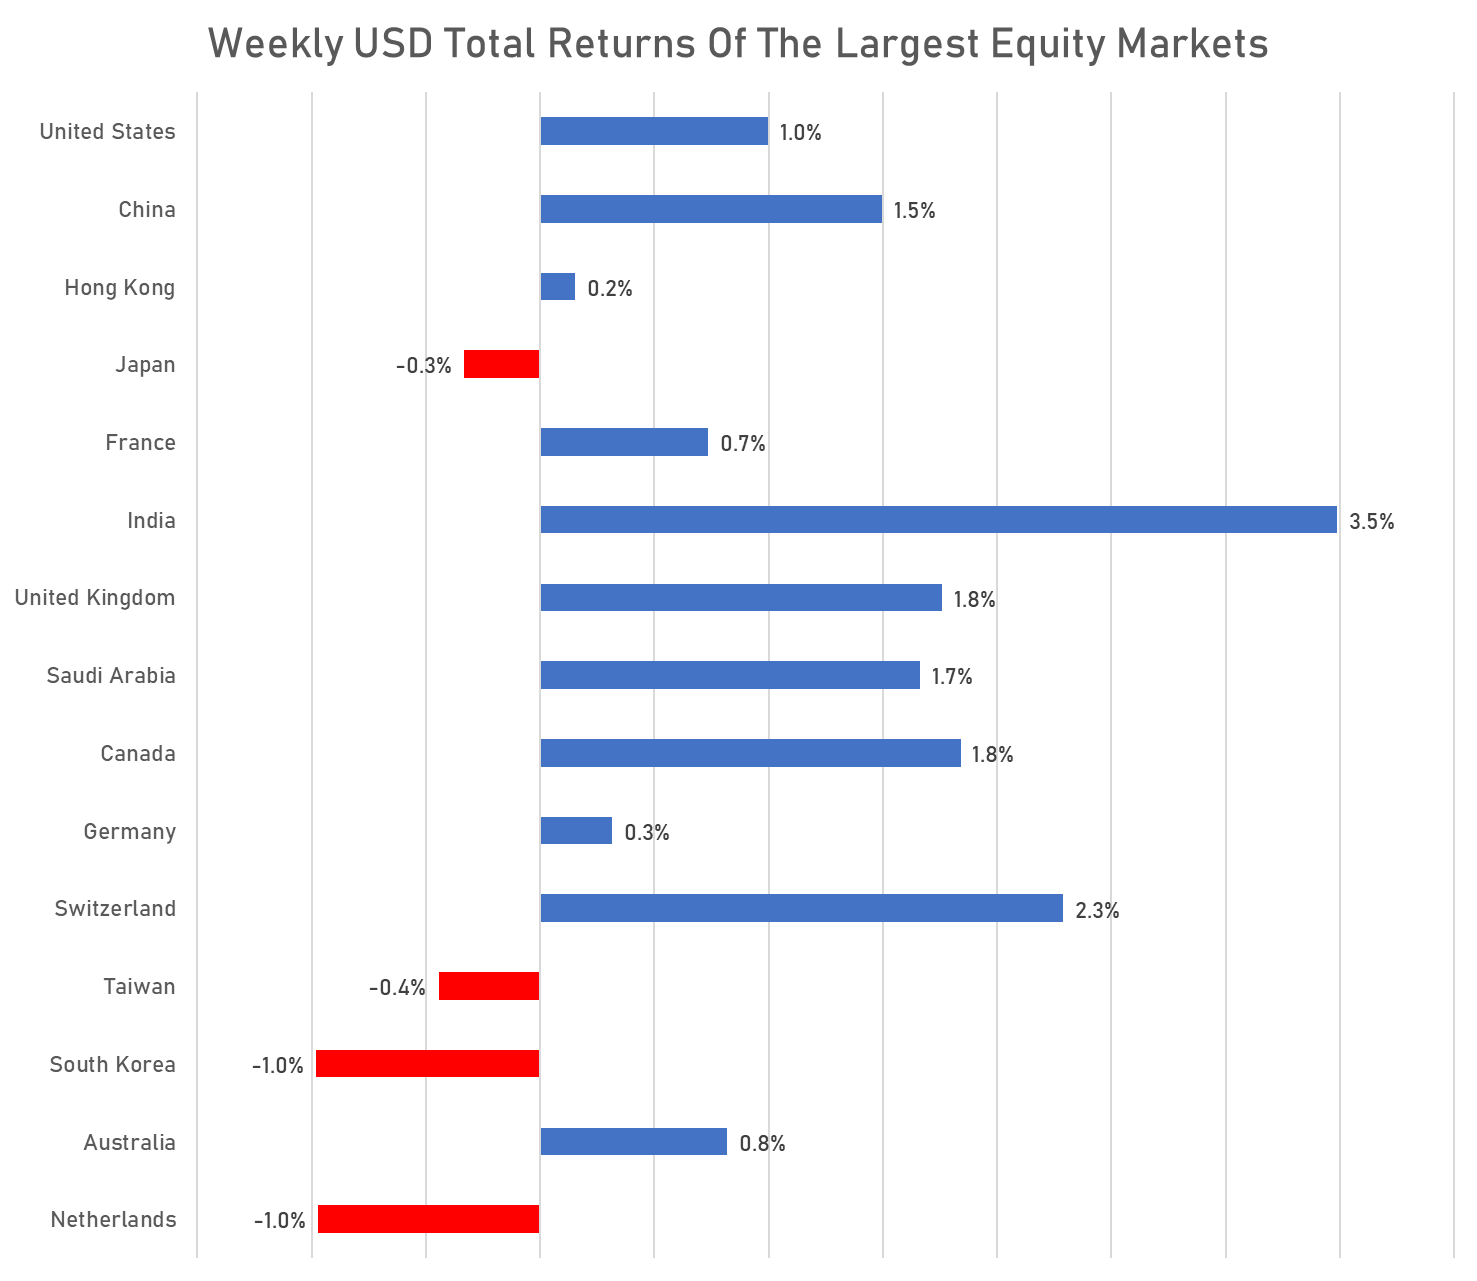 Global Equities Weekly USD Total Returns | Sources: phipost.com, FactSet data